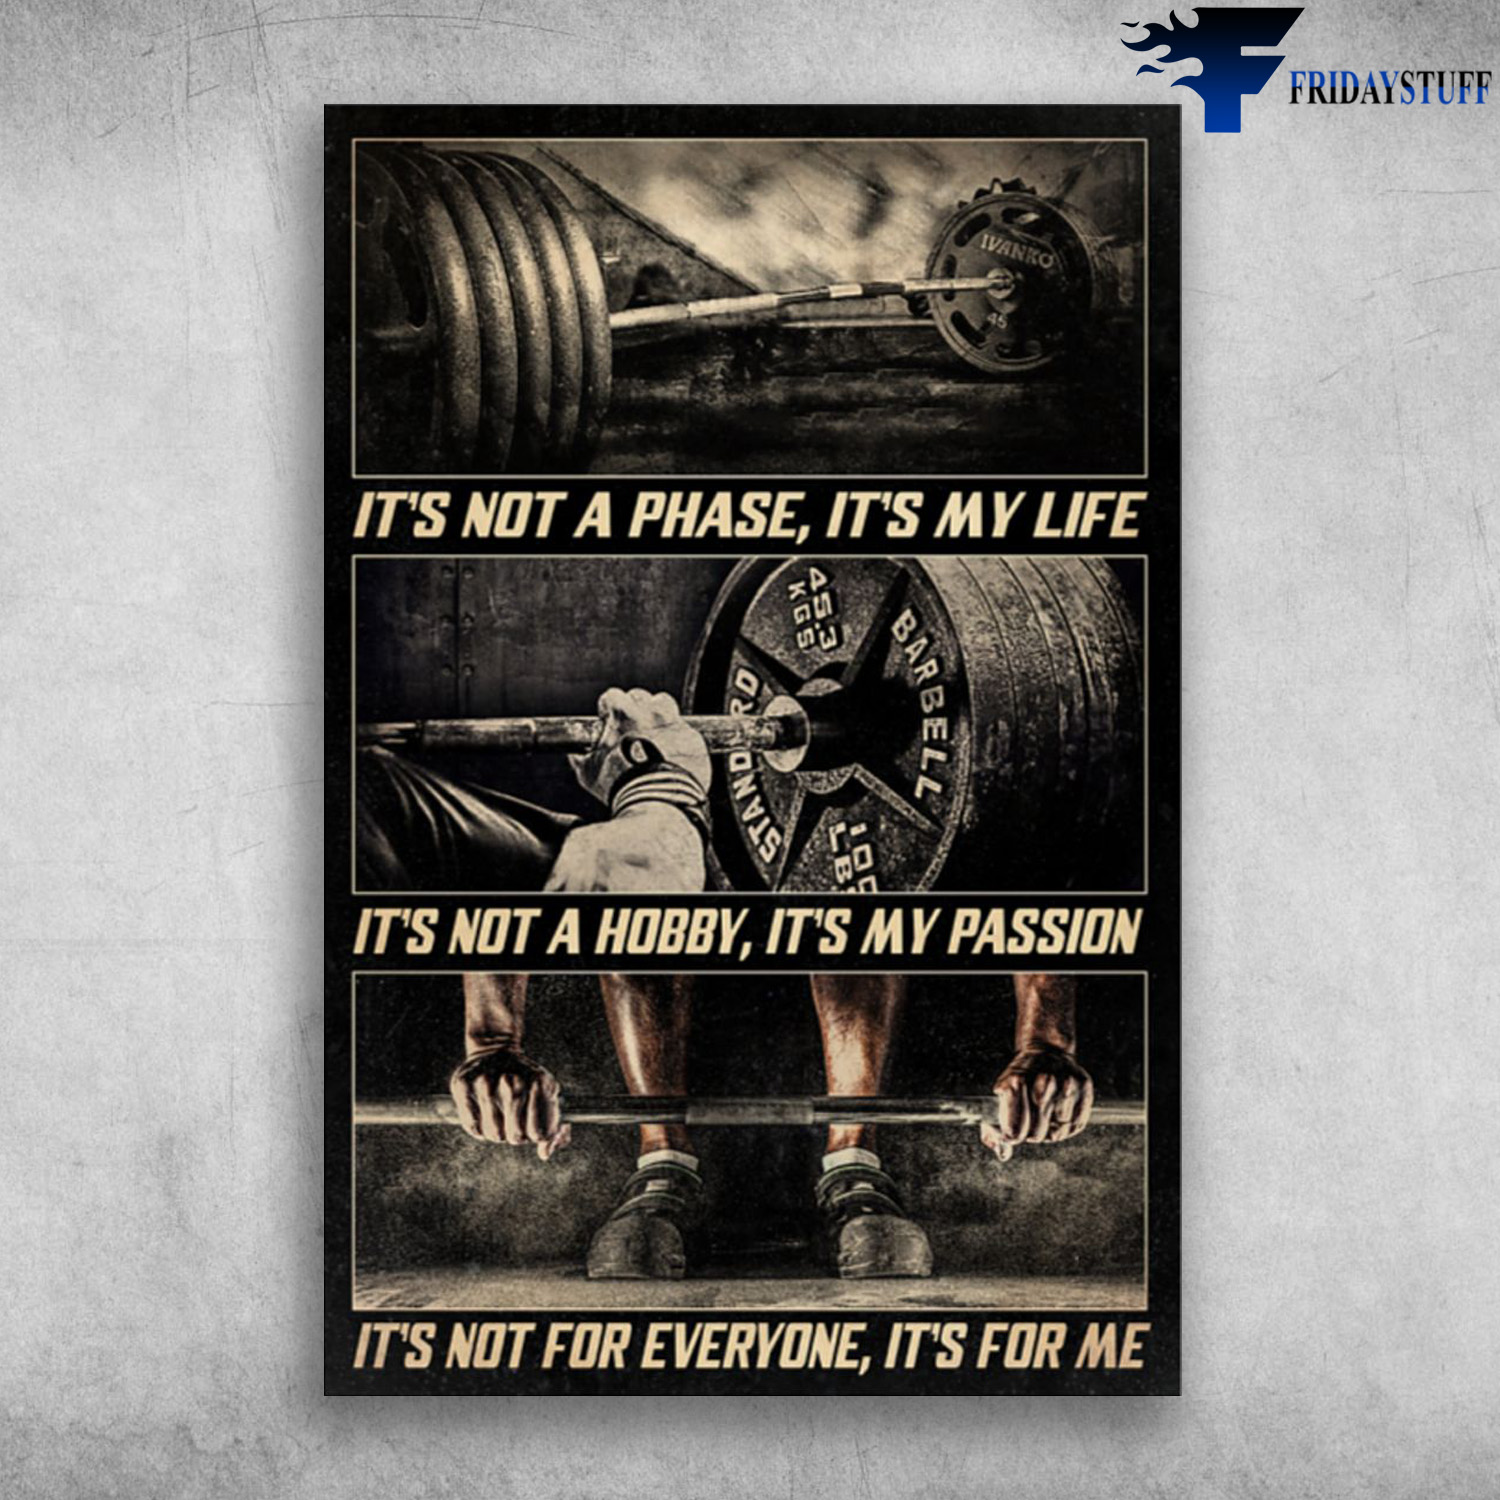 The Barbell - It's Not A Phase, It's My Life, It's Not A Hobby, It's My Passion, It's Not For Everyone, It's For Me